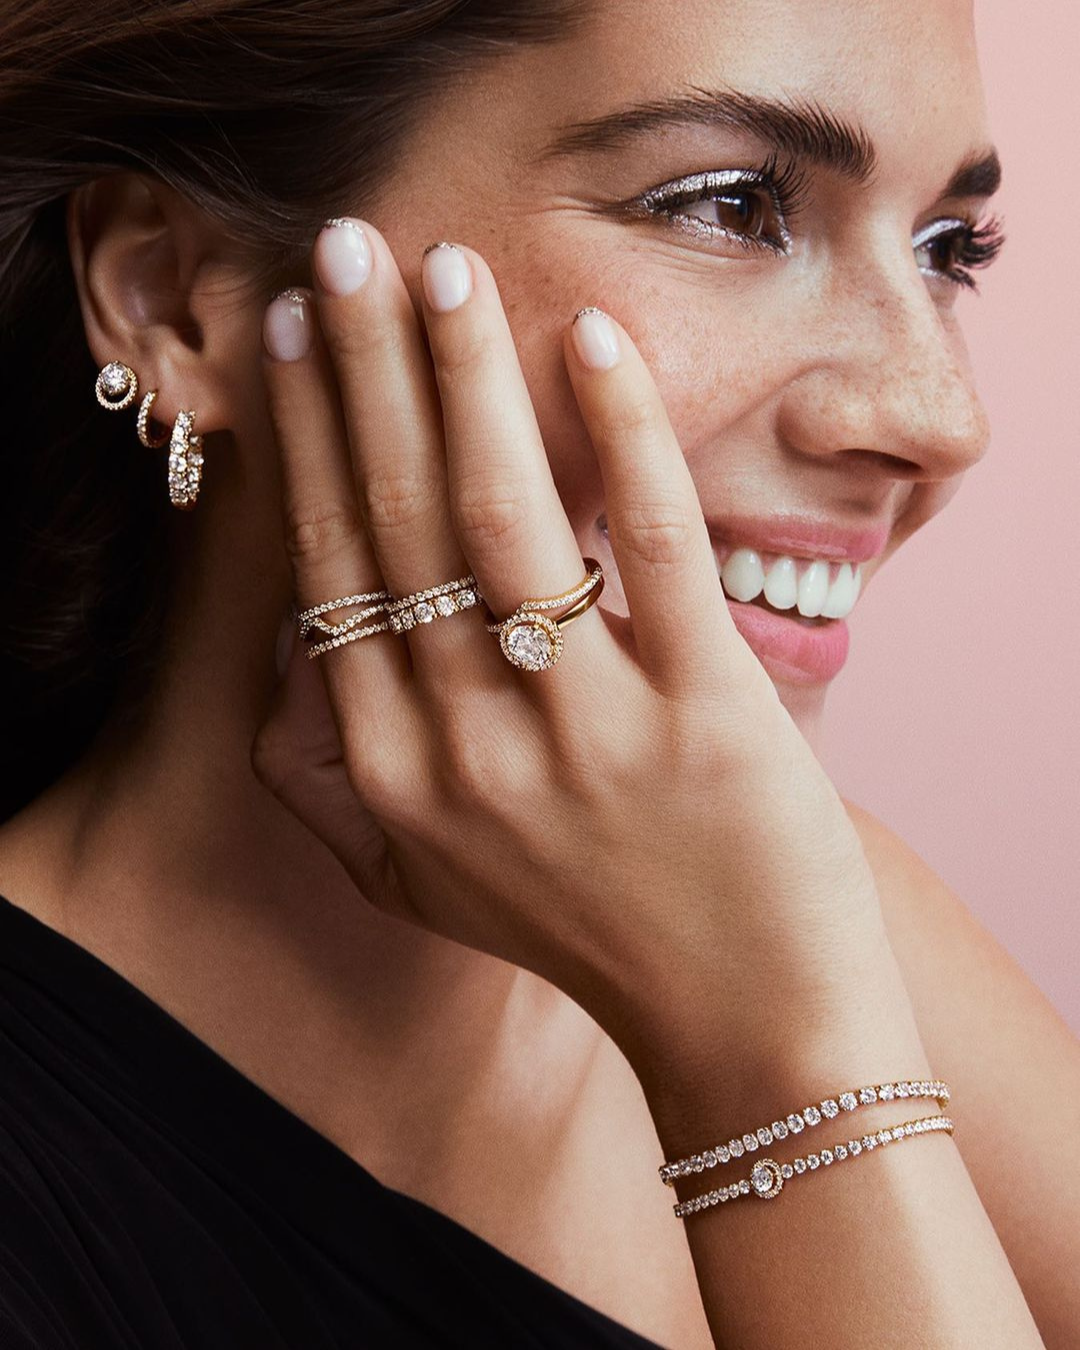 a person wearing jewelry and smiling